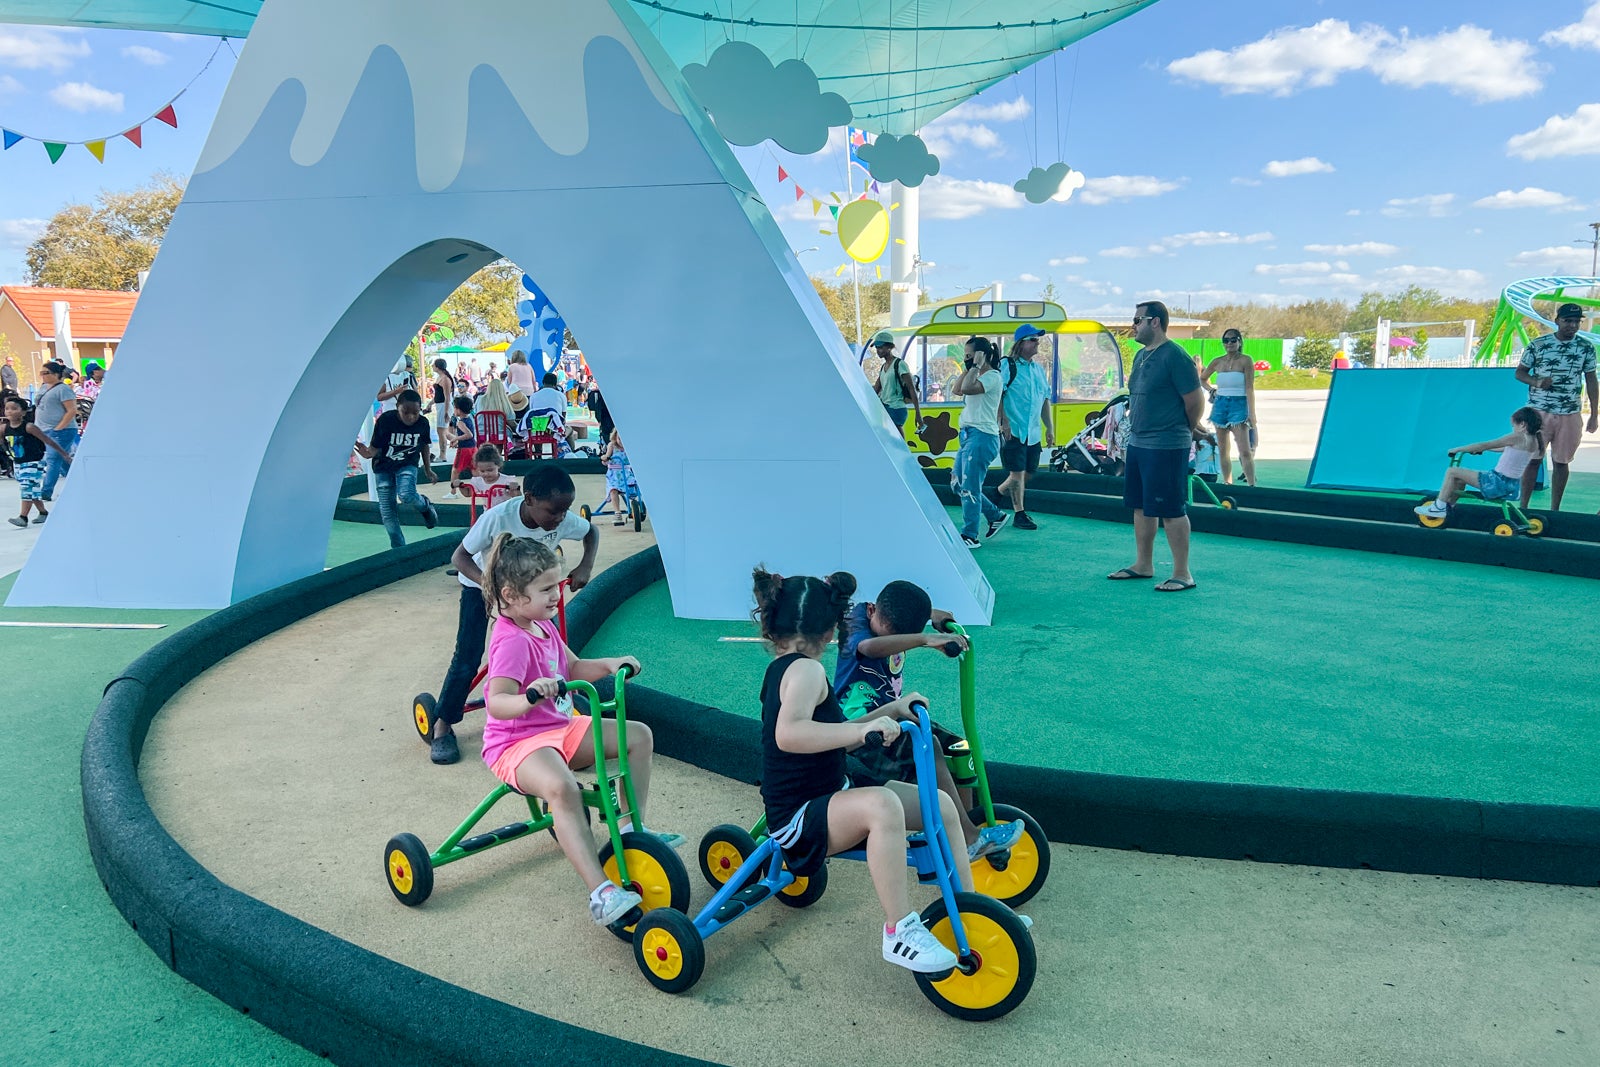 Children riding tricycles at Peppa Pig Theme Park